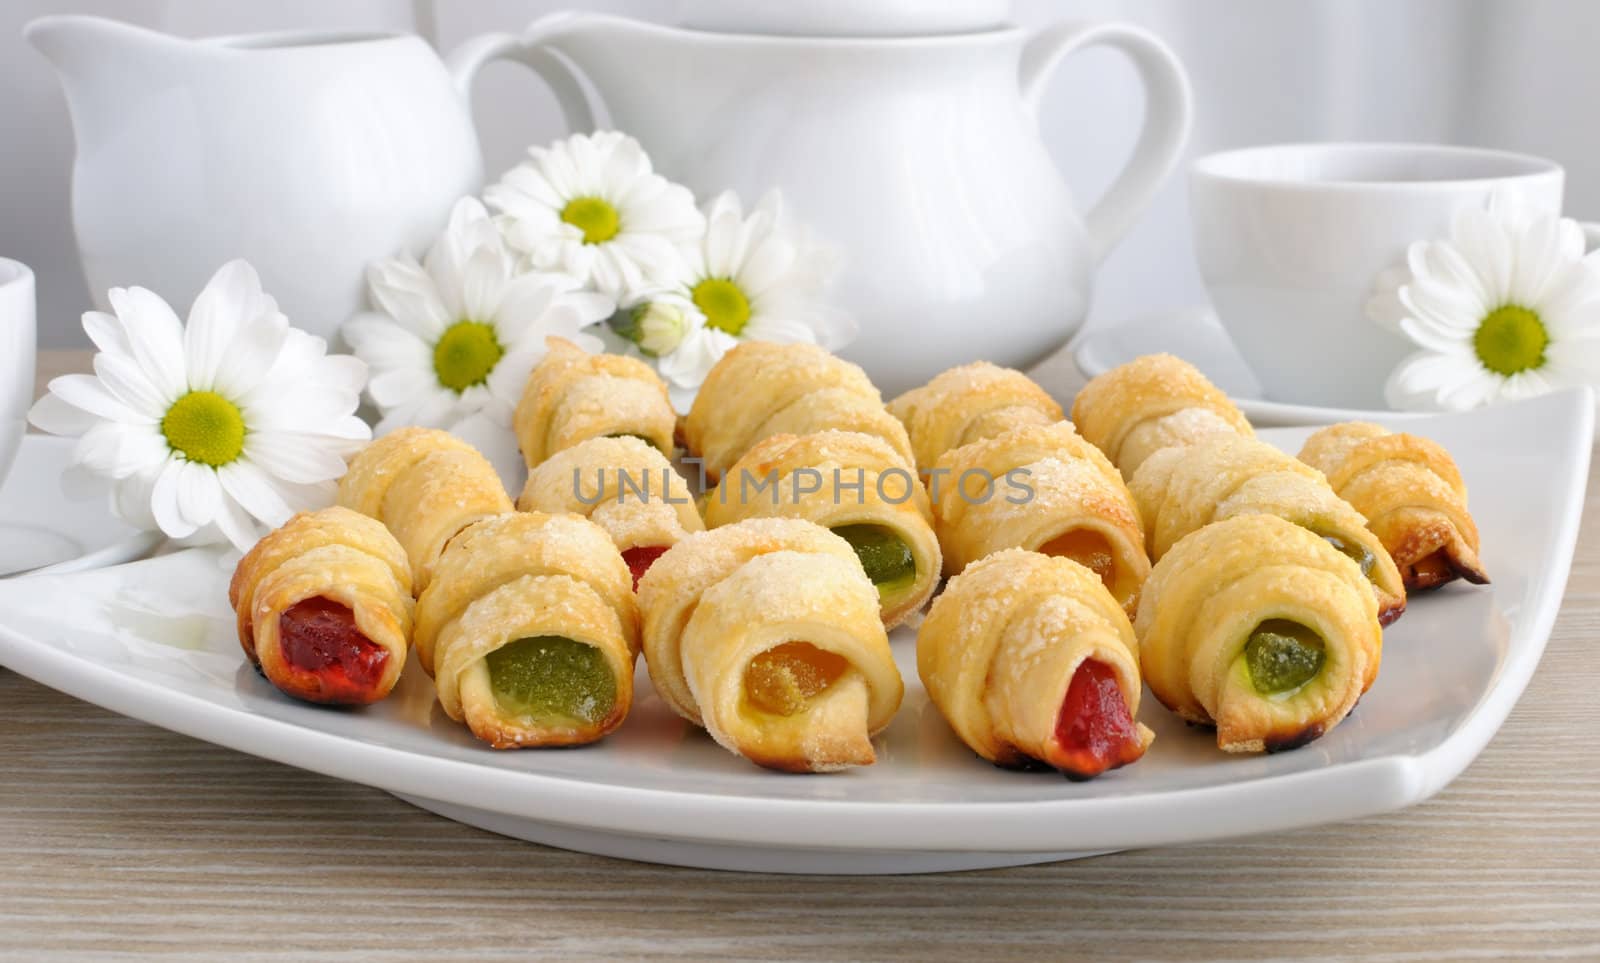 Plate with homemade croissants filled with colorful jelly